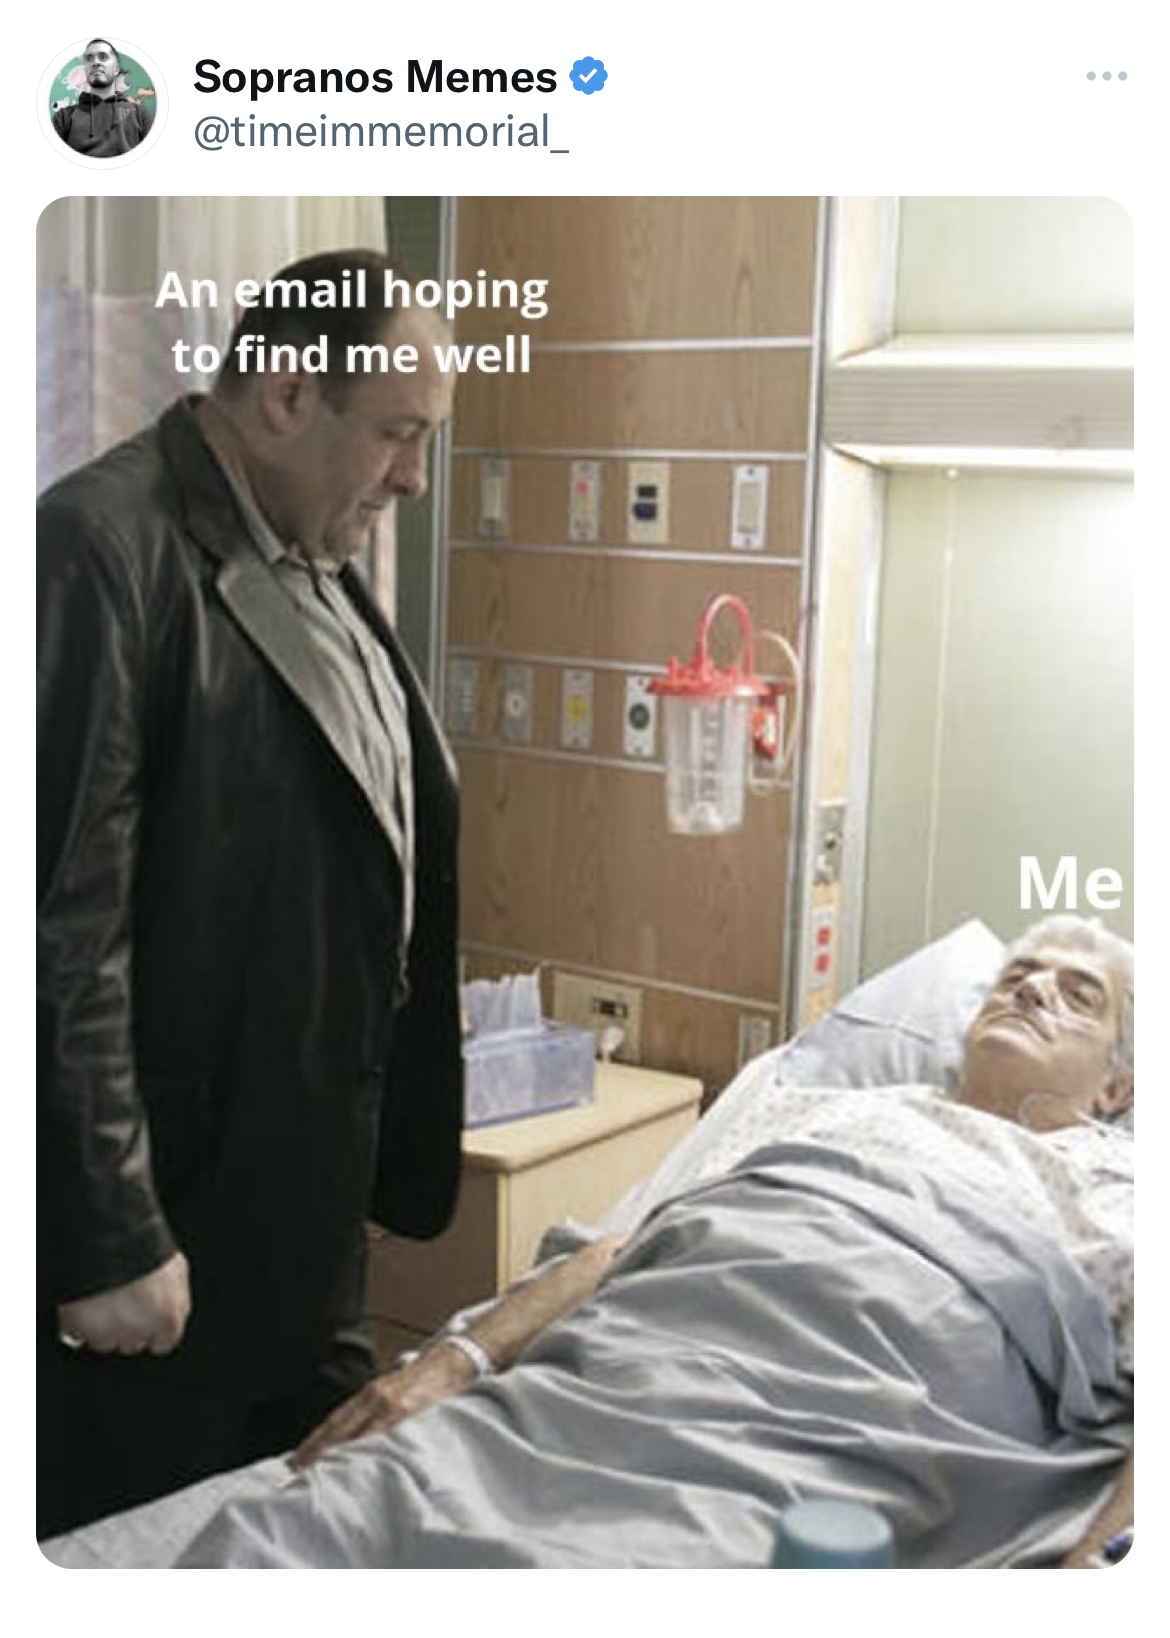 savage and absurd tweets - Sopranos Memes An email hoping to find me well Bakid Me